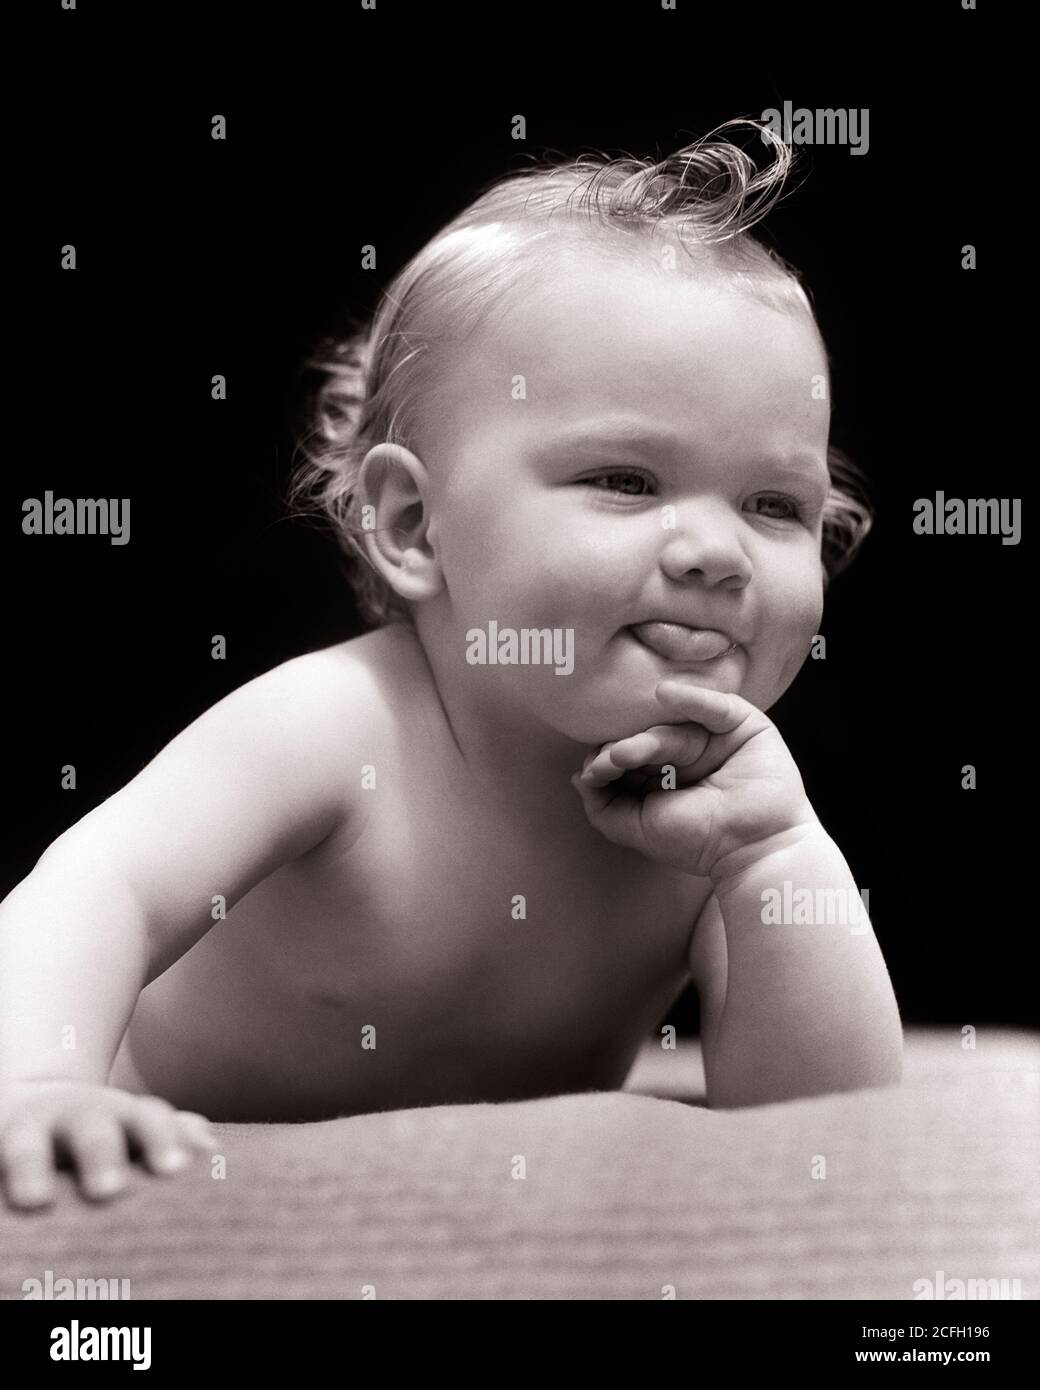 1930s CUTE ENGAGING BLOND BABY GIRL WITH ATTITUDE LYING ON BELLY RESTING CHIN ON HAND POLITELY STICKING OUT HER TONGUE - b17101 HAR001 HARS CHIN GESTURING EXPRESSIONS B&W RESTING HUMOROUS COMICAL STICKING GESTURES COMEDY PLEASANT AGREEABLE CHARMING JUVENILES LOVABLE PLEASING ADORABLE APPEALING BABY GIRL BLACK AND WHITE CAUCASIAN ETHNICITY HAR001 OLD FASHIONED Stock Photo